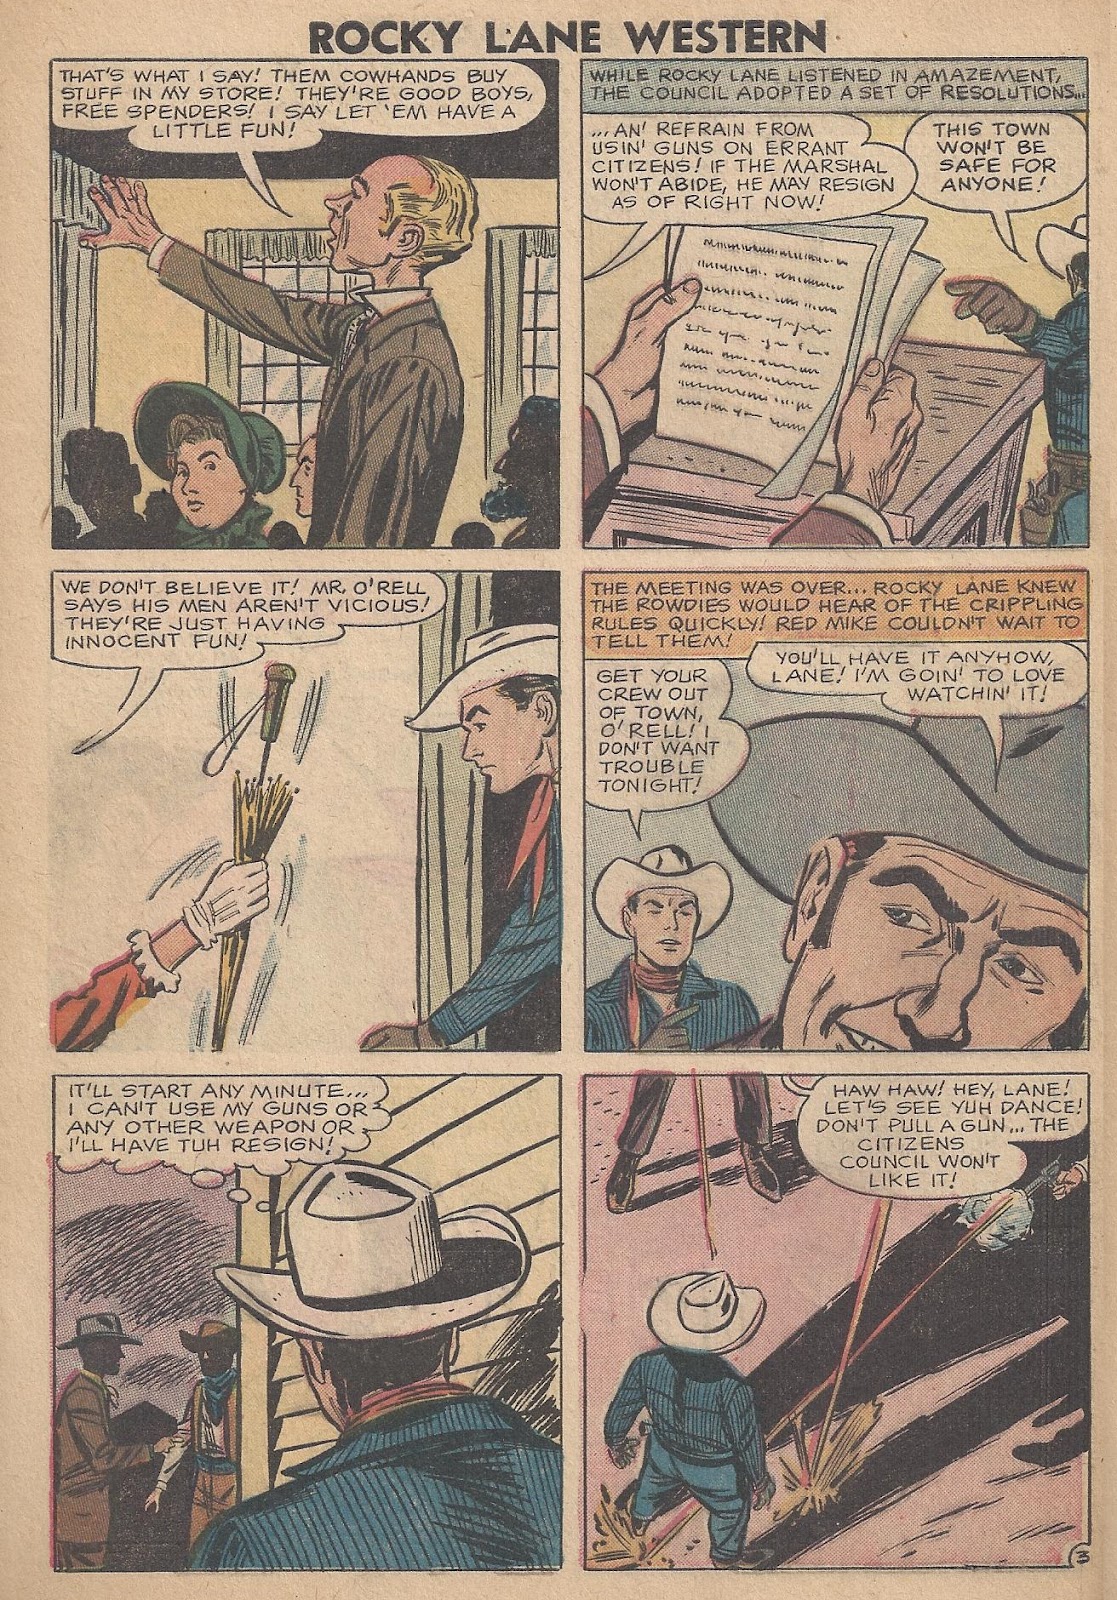 Rocky Lane Western (1954) issue 80 - Page 5